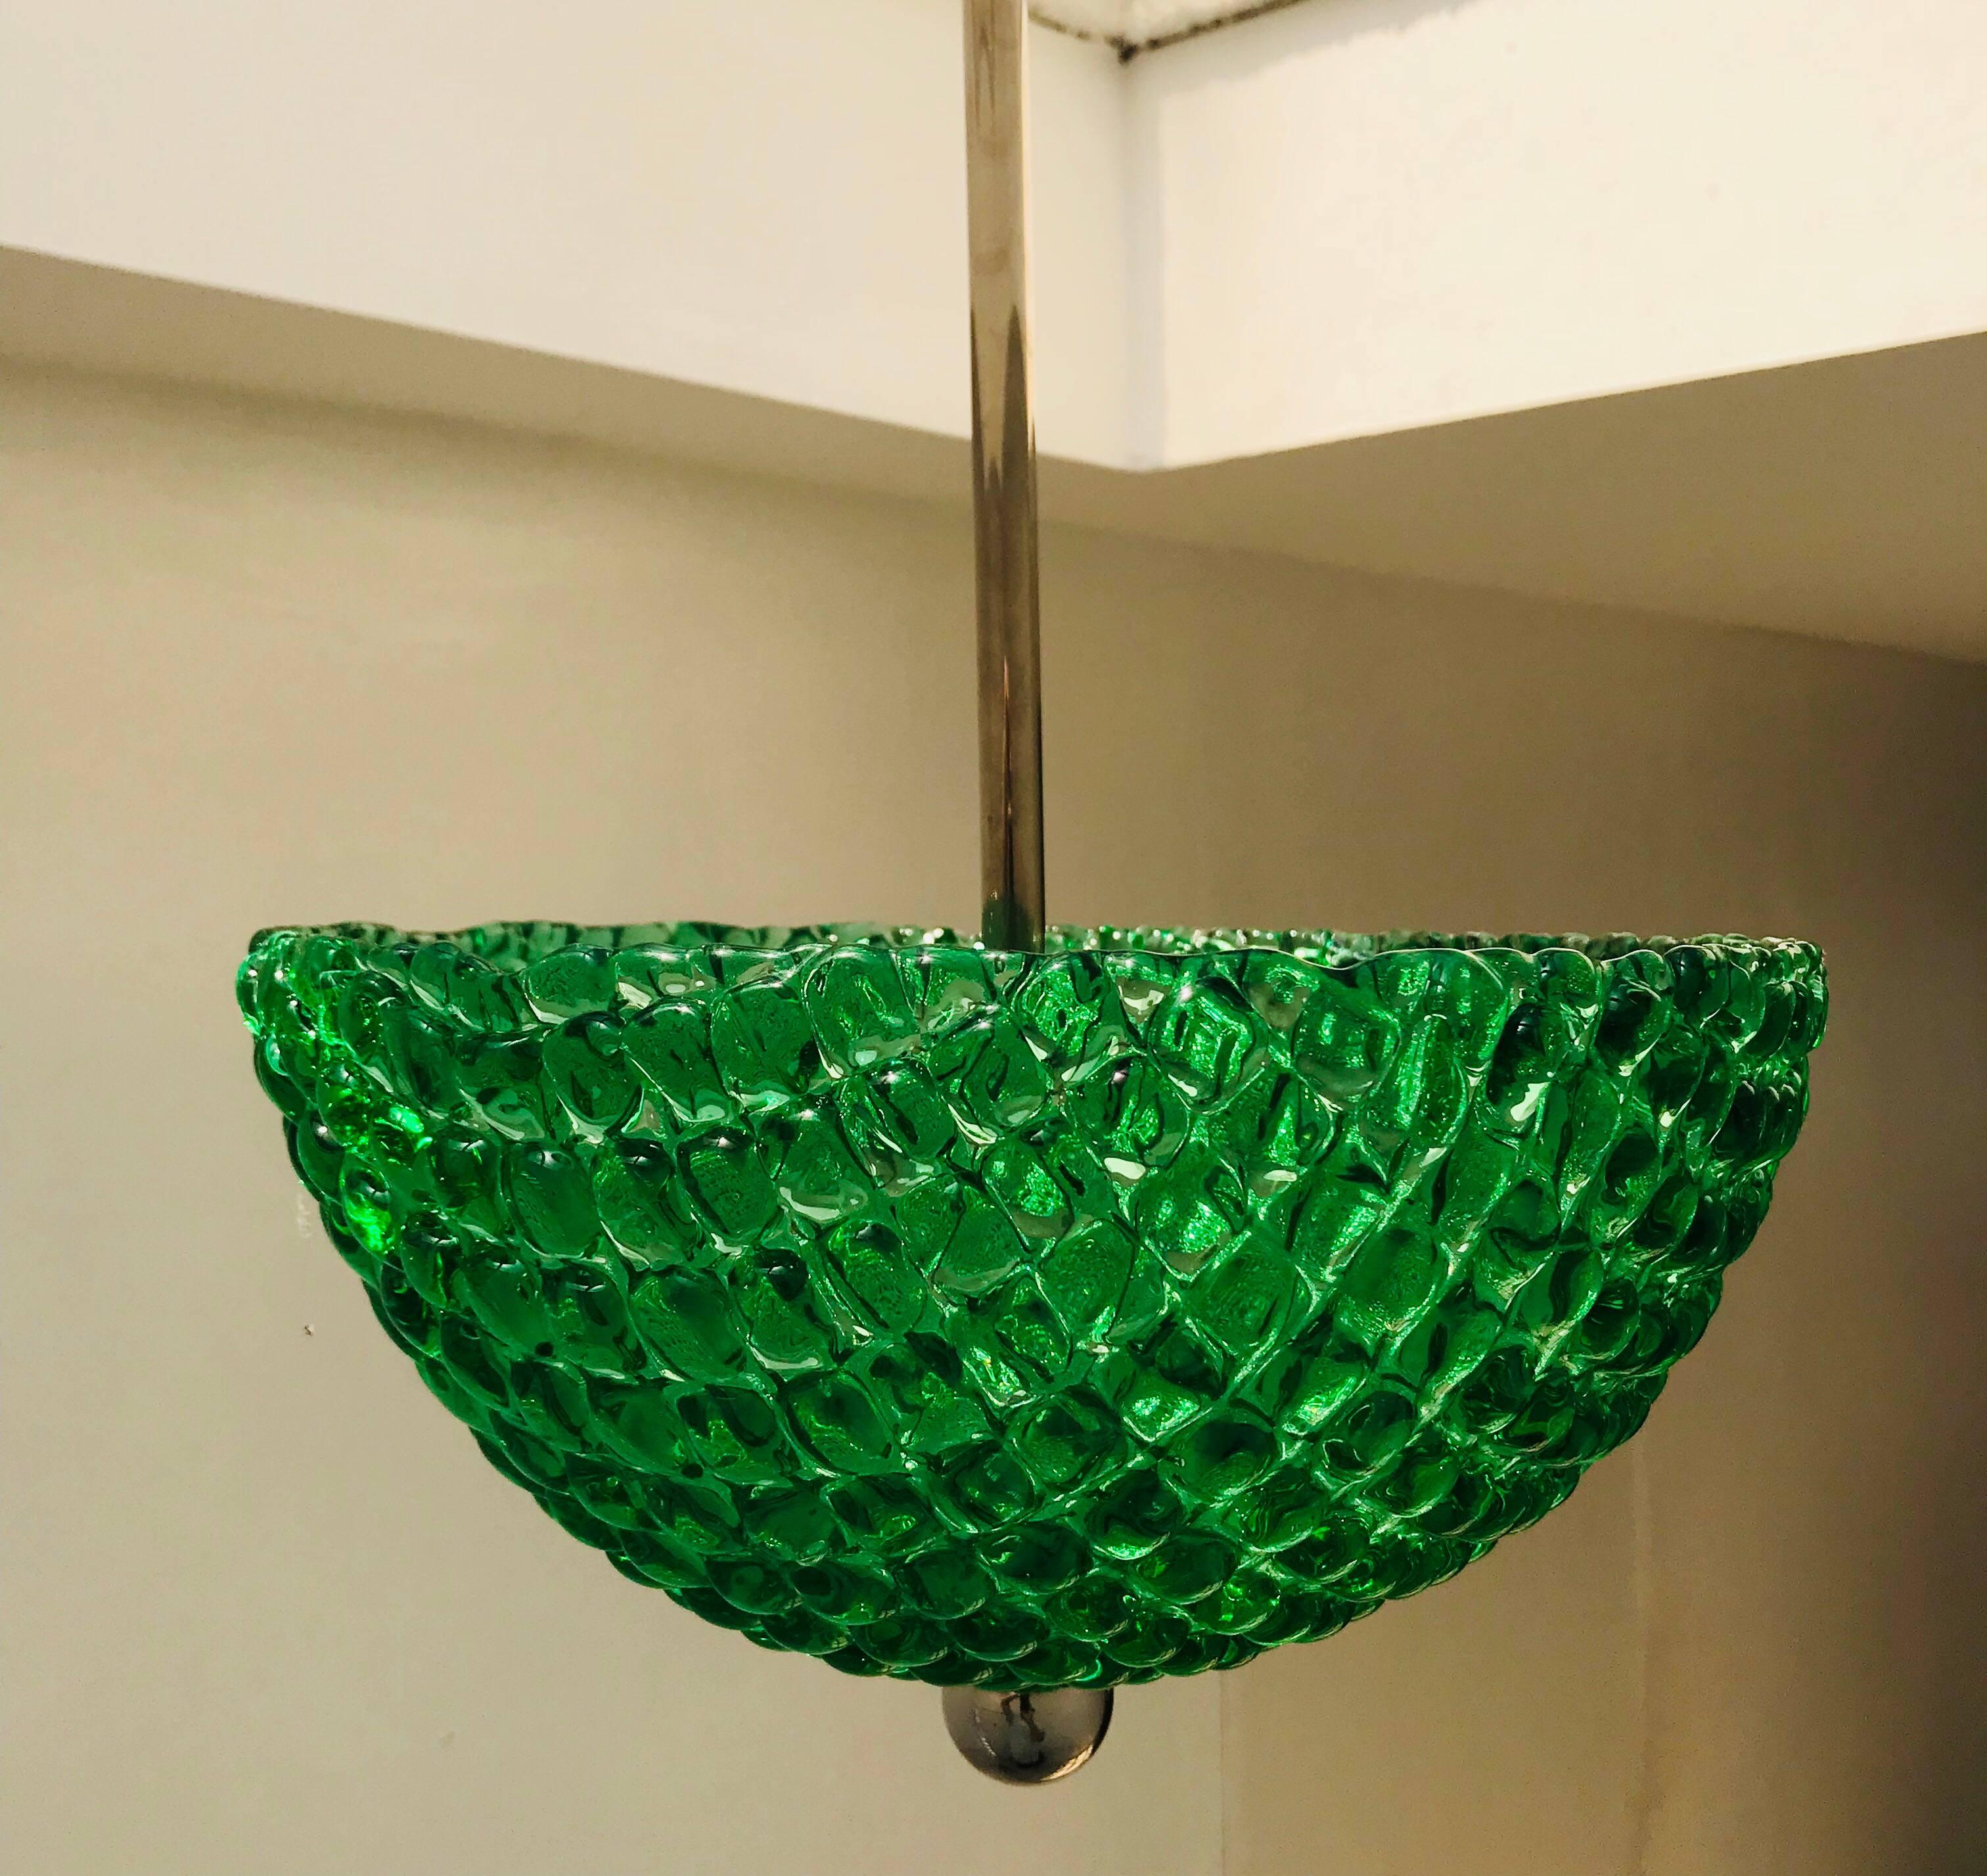 A wonderful pair of bright emerald green lattice design Murano glass bowls with polished nickel hardware. Three lights sources in each pendant. Newly rewired.